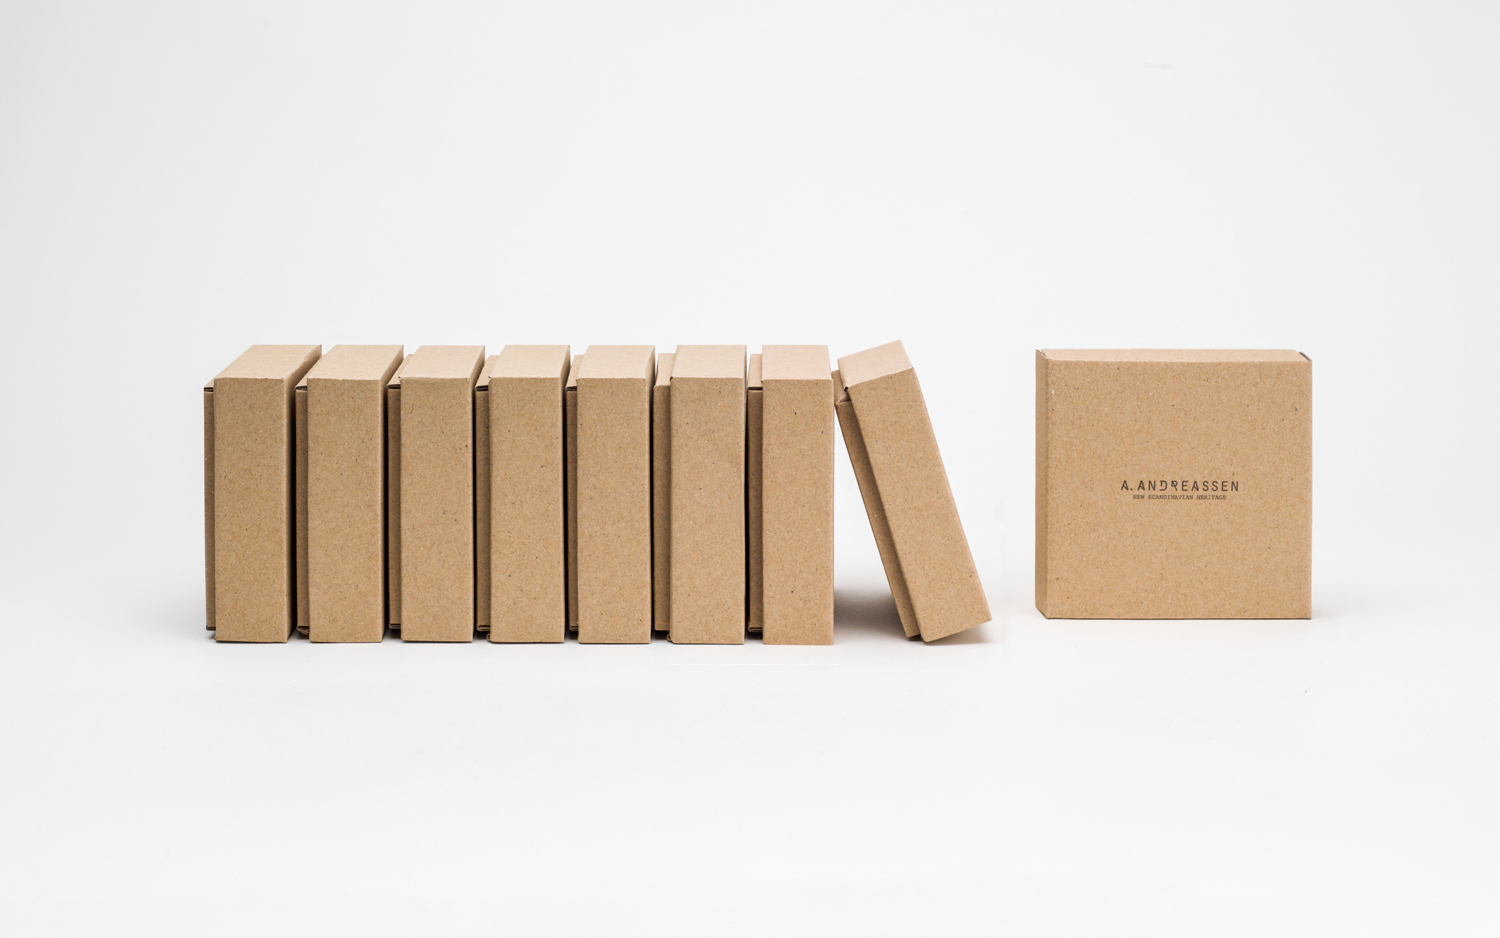 Brand identity and package design by Helsinki based Bond for new Scandinavian lifestyle brand A. Andreassen